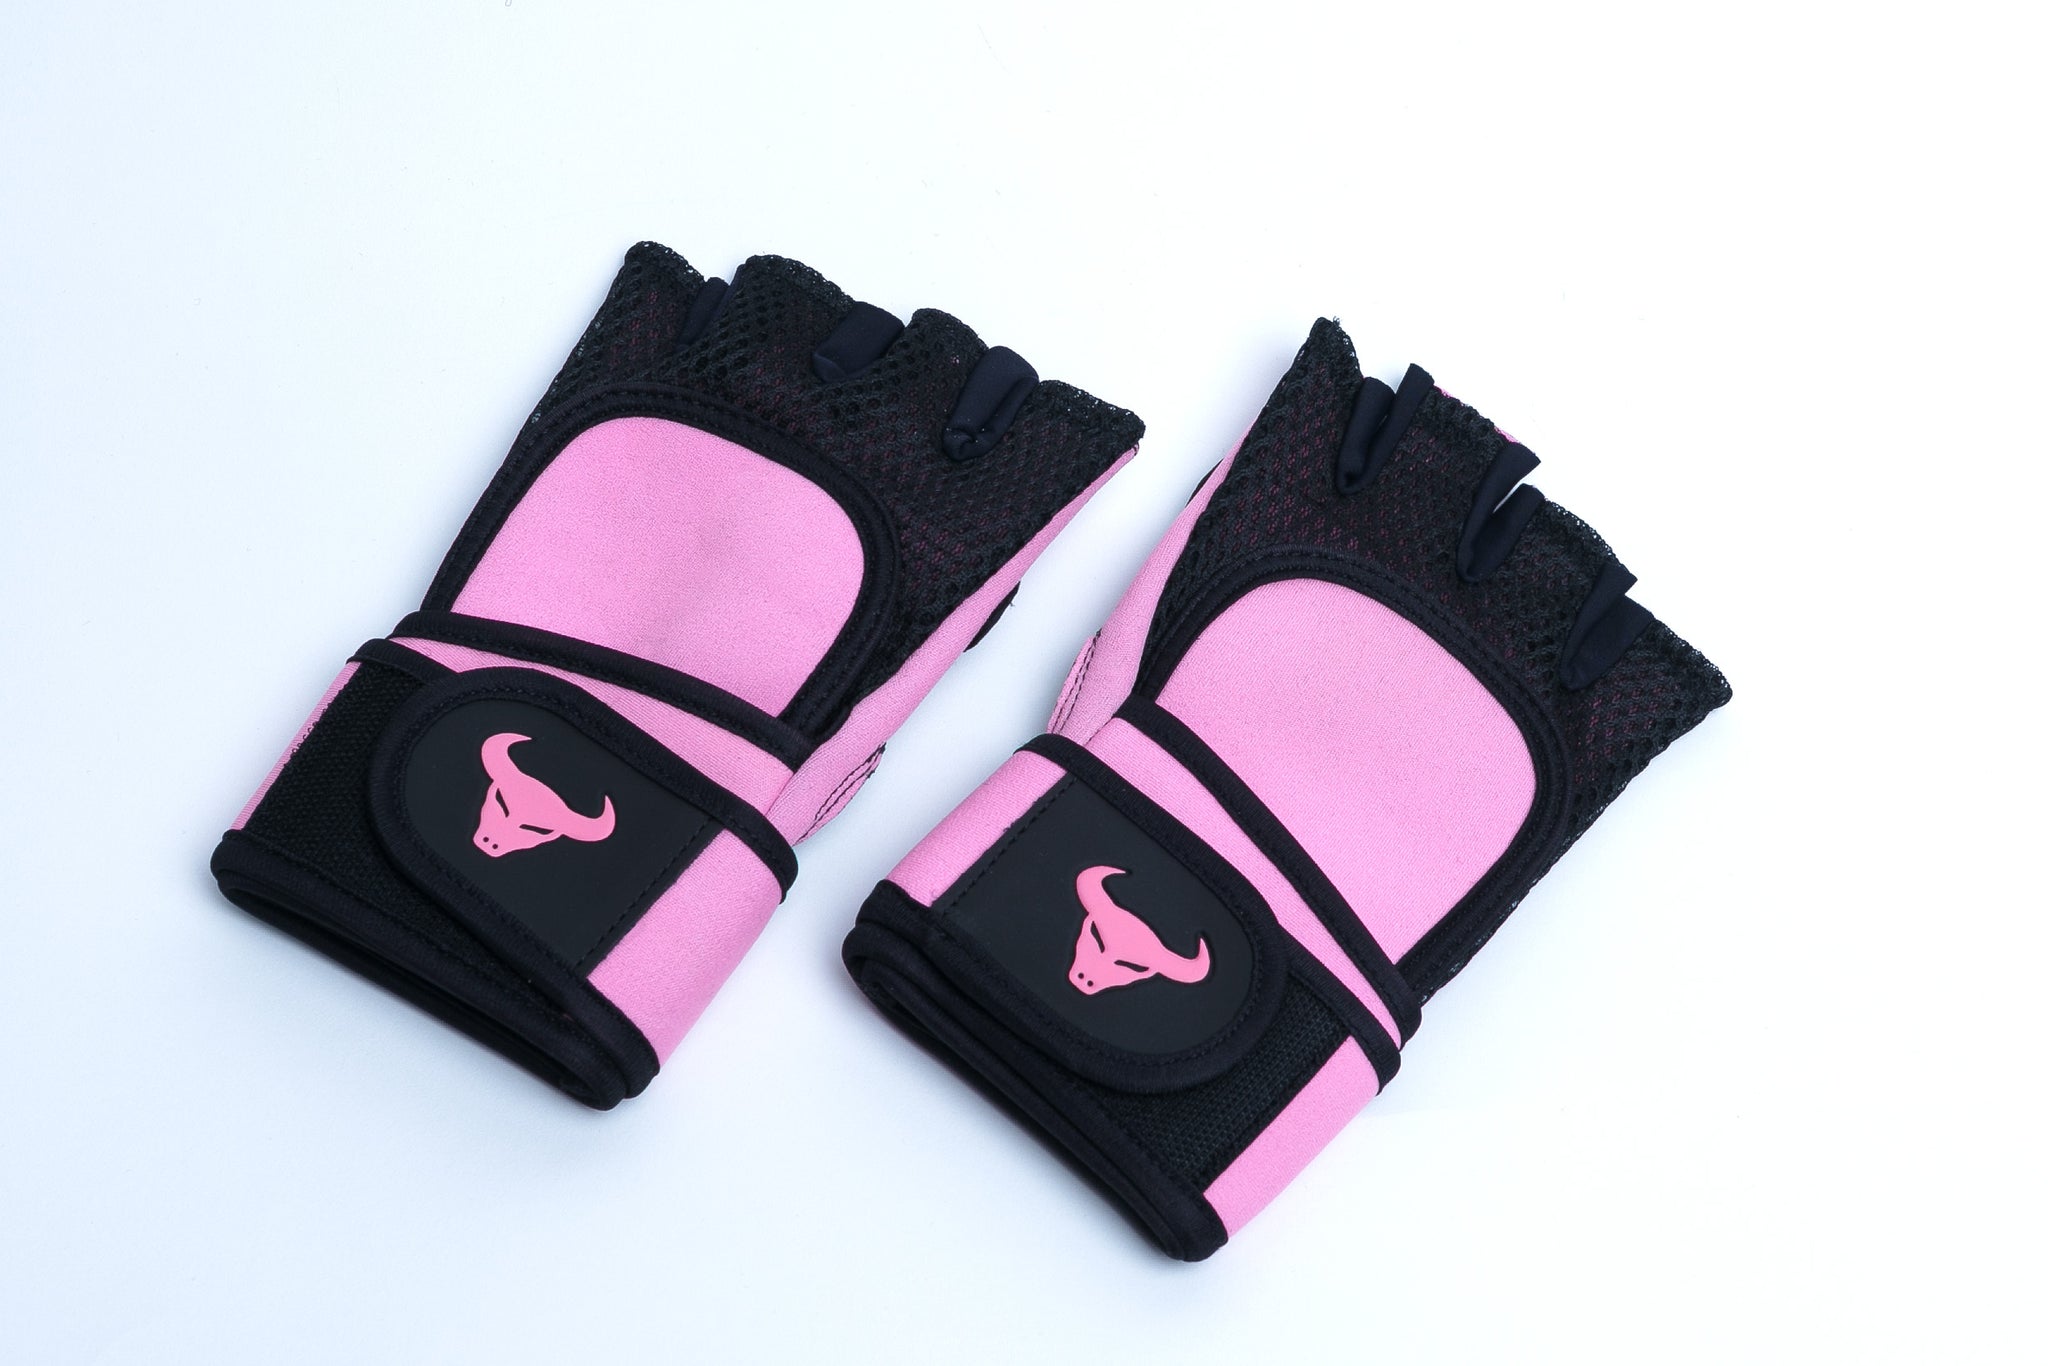 WEIGHTED WORKOUT GLOVES – EL TORO